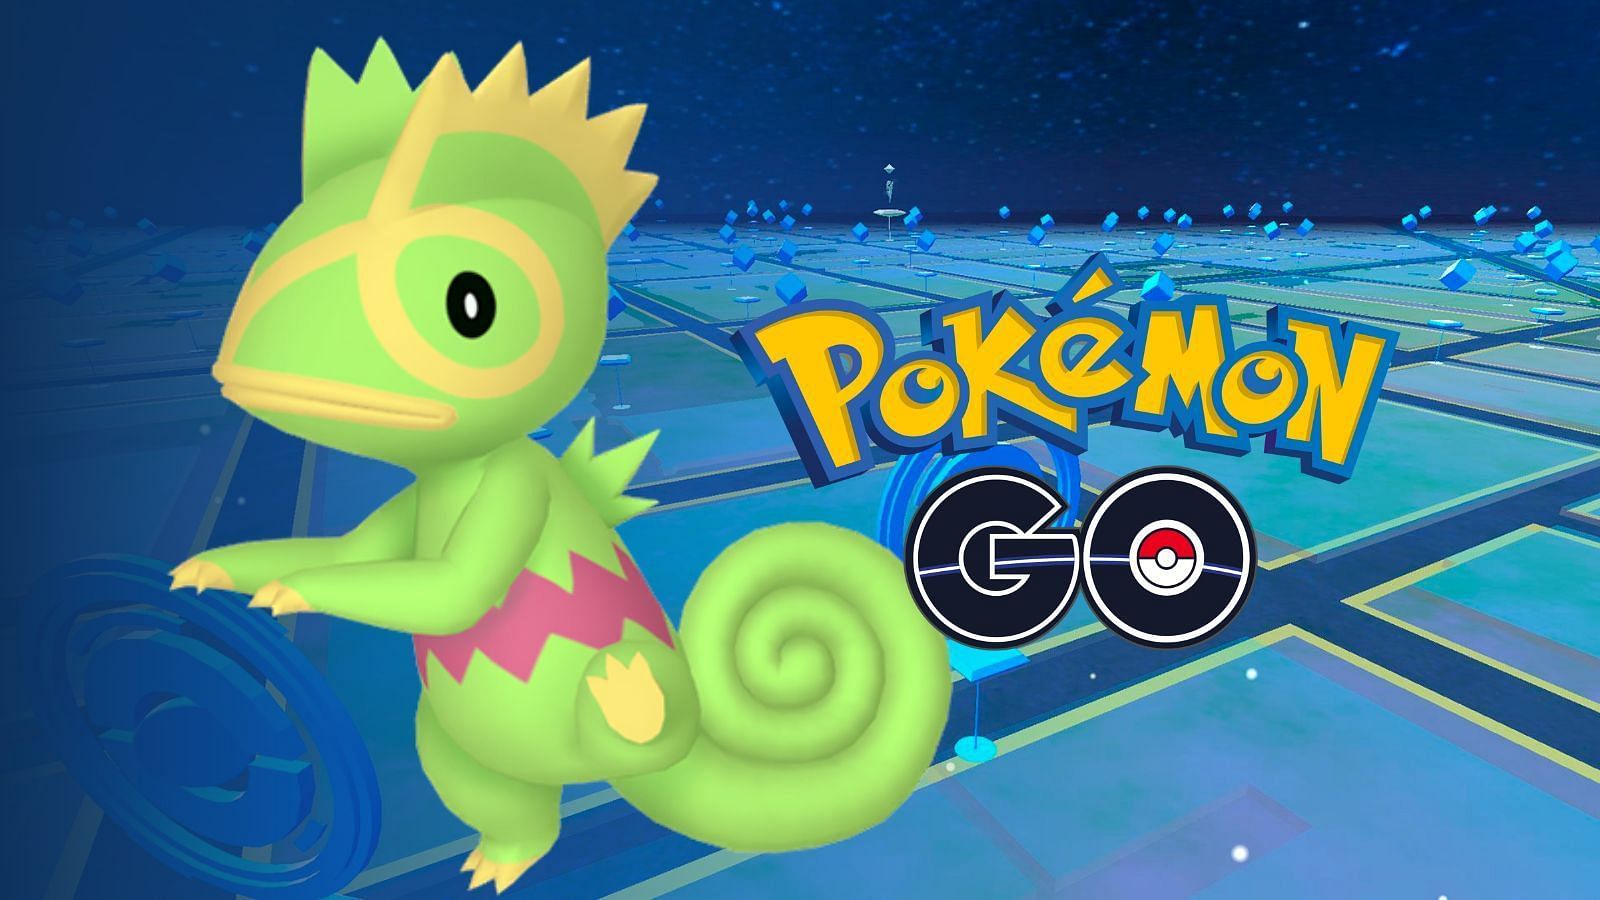 Shiny Kecleon is coming to Pokemon GO in the upcoming Las Vegas event. (Image via Niantic)